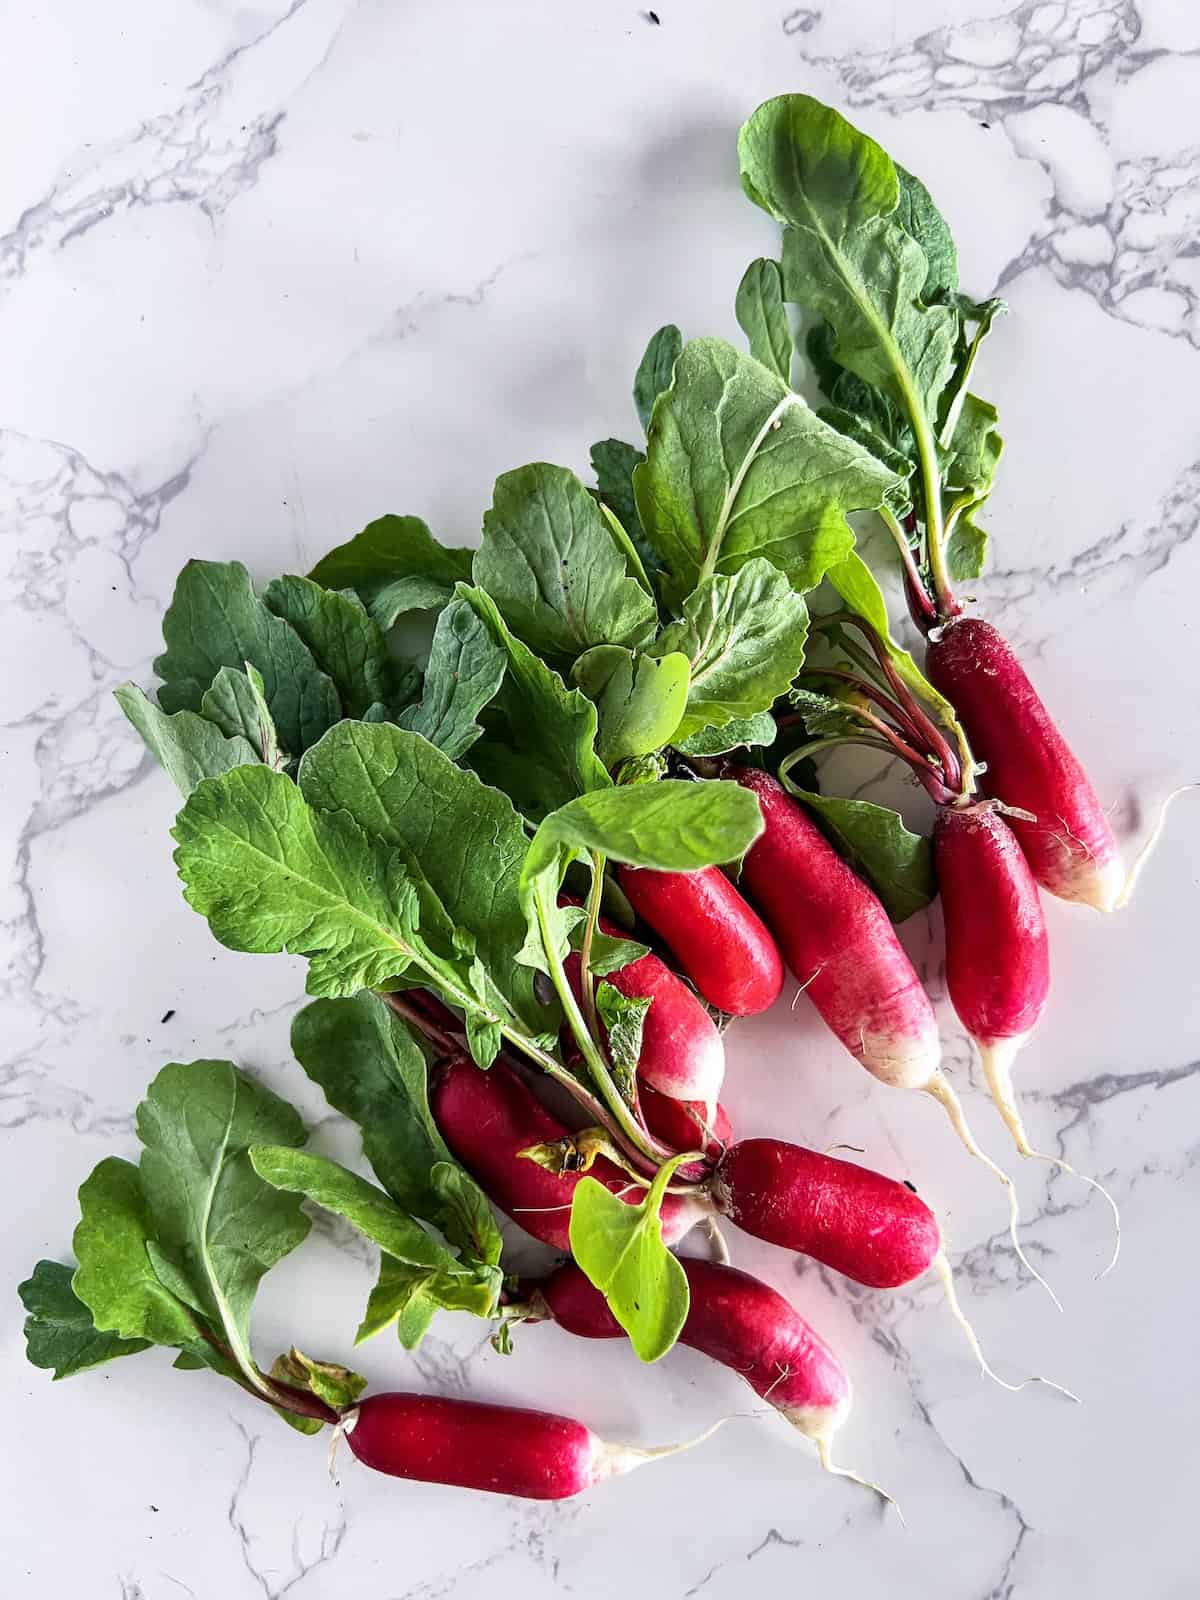 A bunch of French Breakfast radishes.